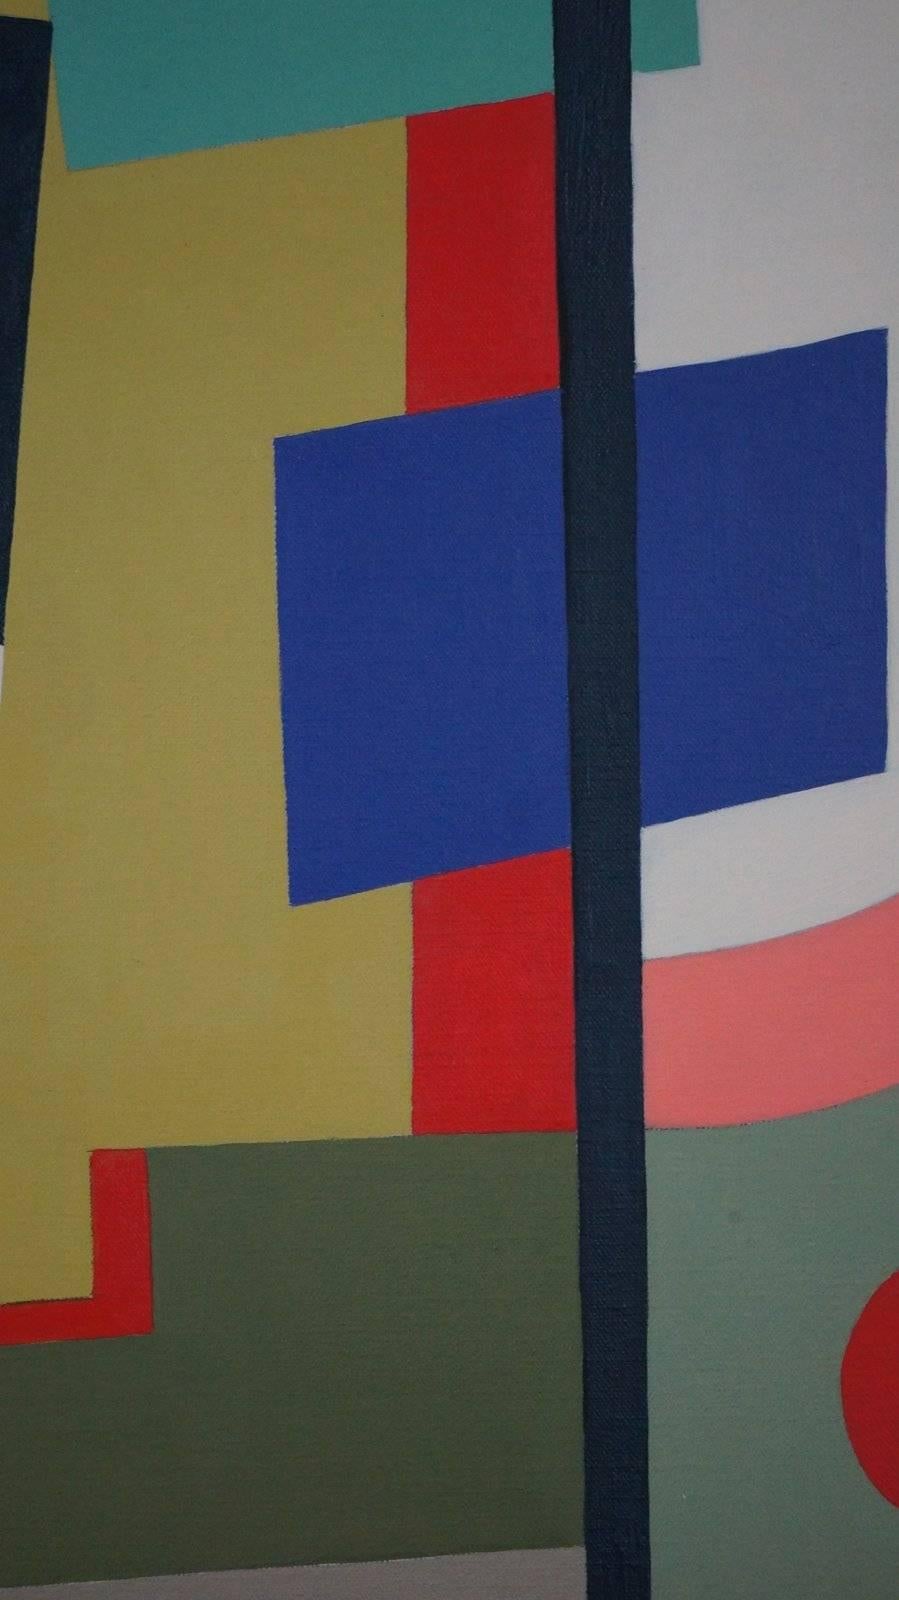 Abstract Geometric Composition SP15, 2015 - acrylic, 75x94  cm., framed - Gray Abstract Painting by Pedrini Silvia